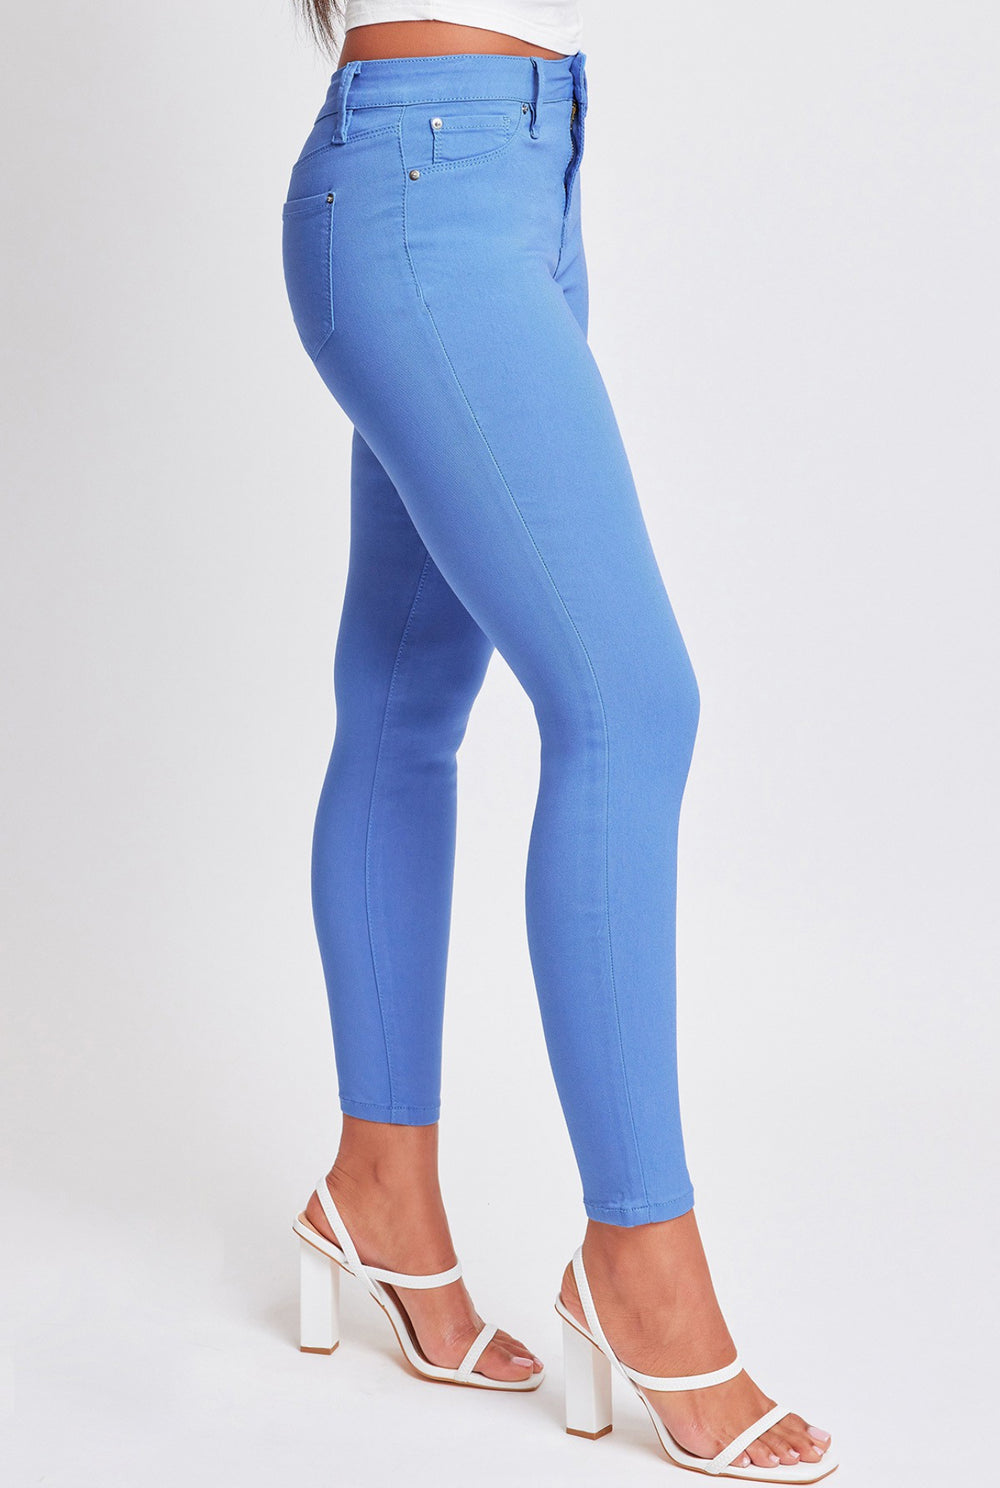 Forever Color Hyperstretch Mid-Rise Skinny Jean-Pants-ymi-Shop with Bloom West Boutique, Women's Fashion Boutique, Located in Houma, Louisiana